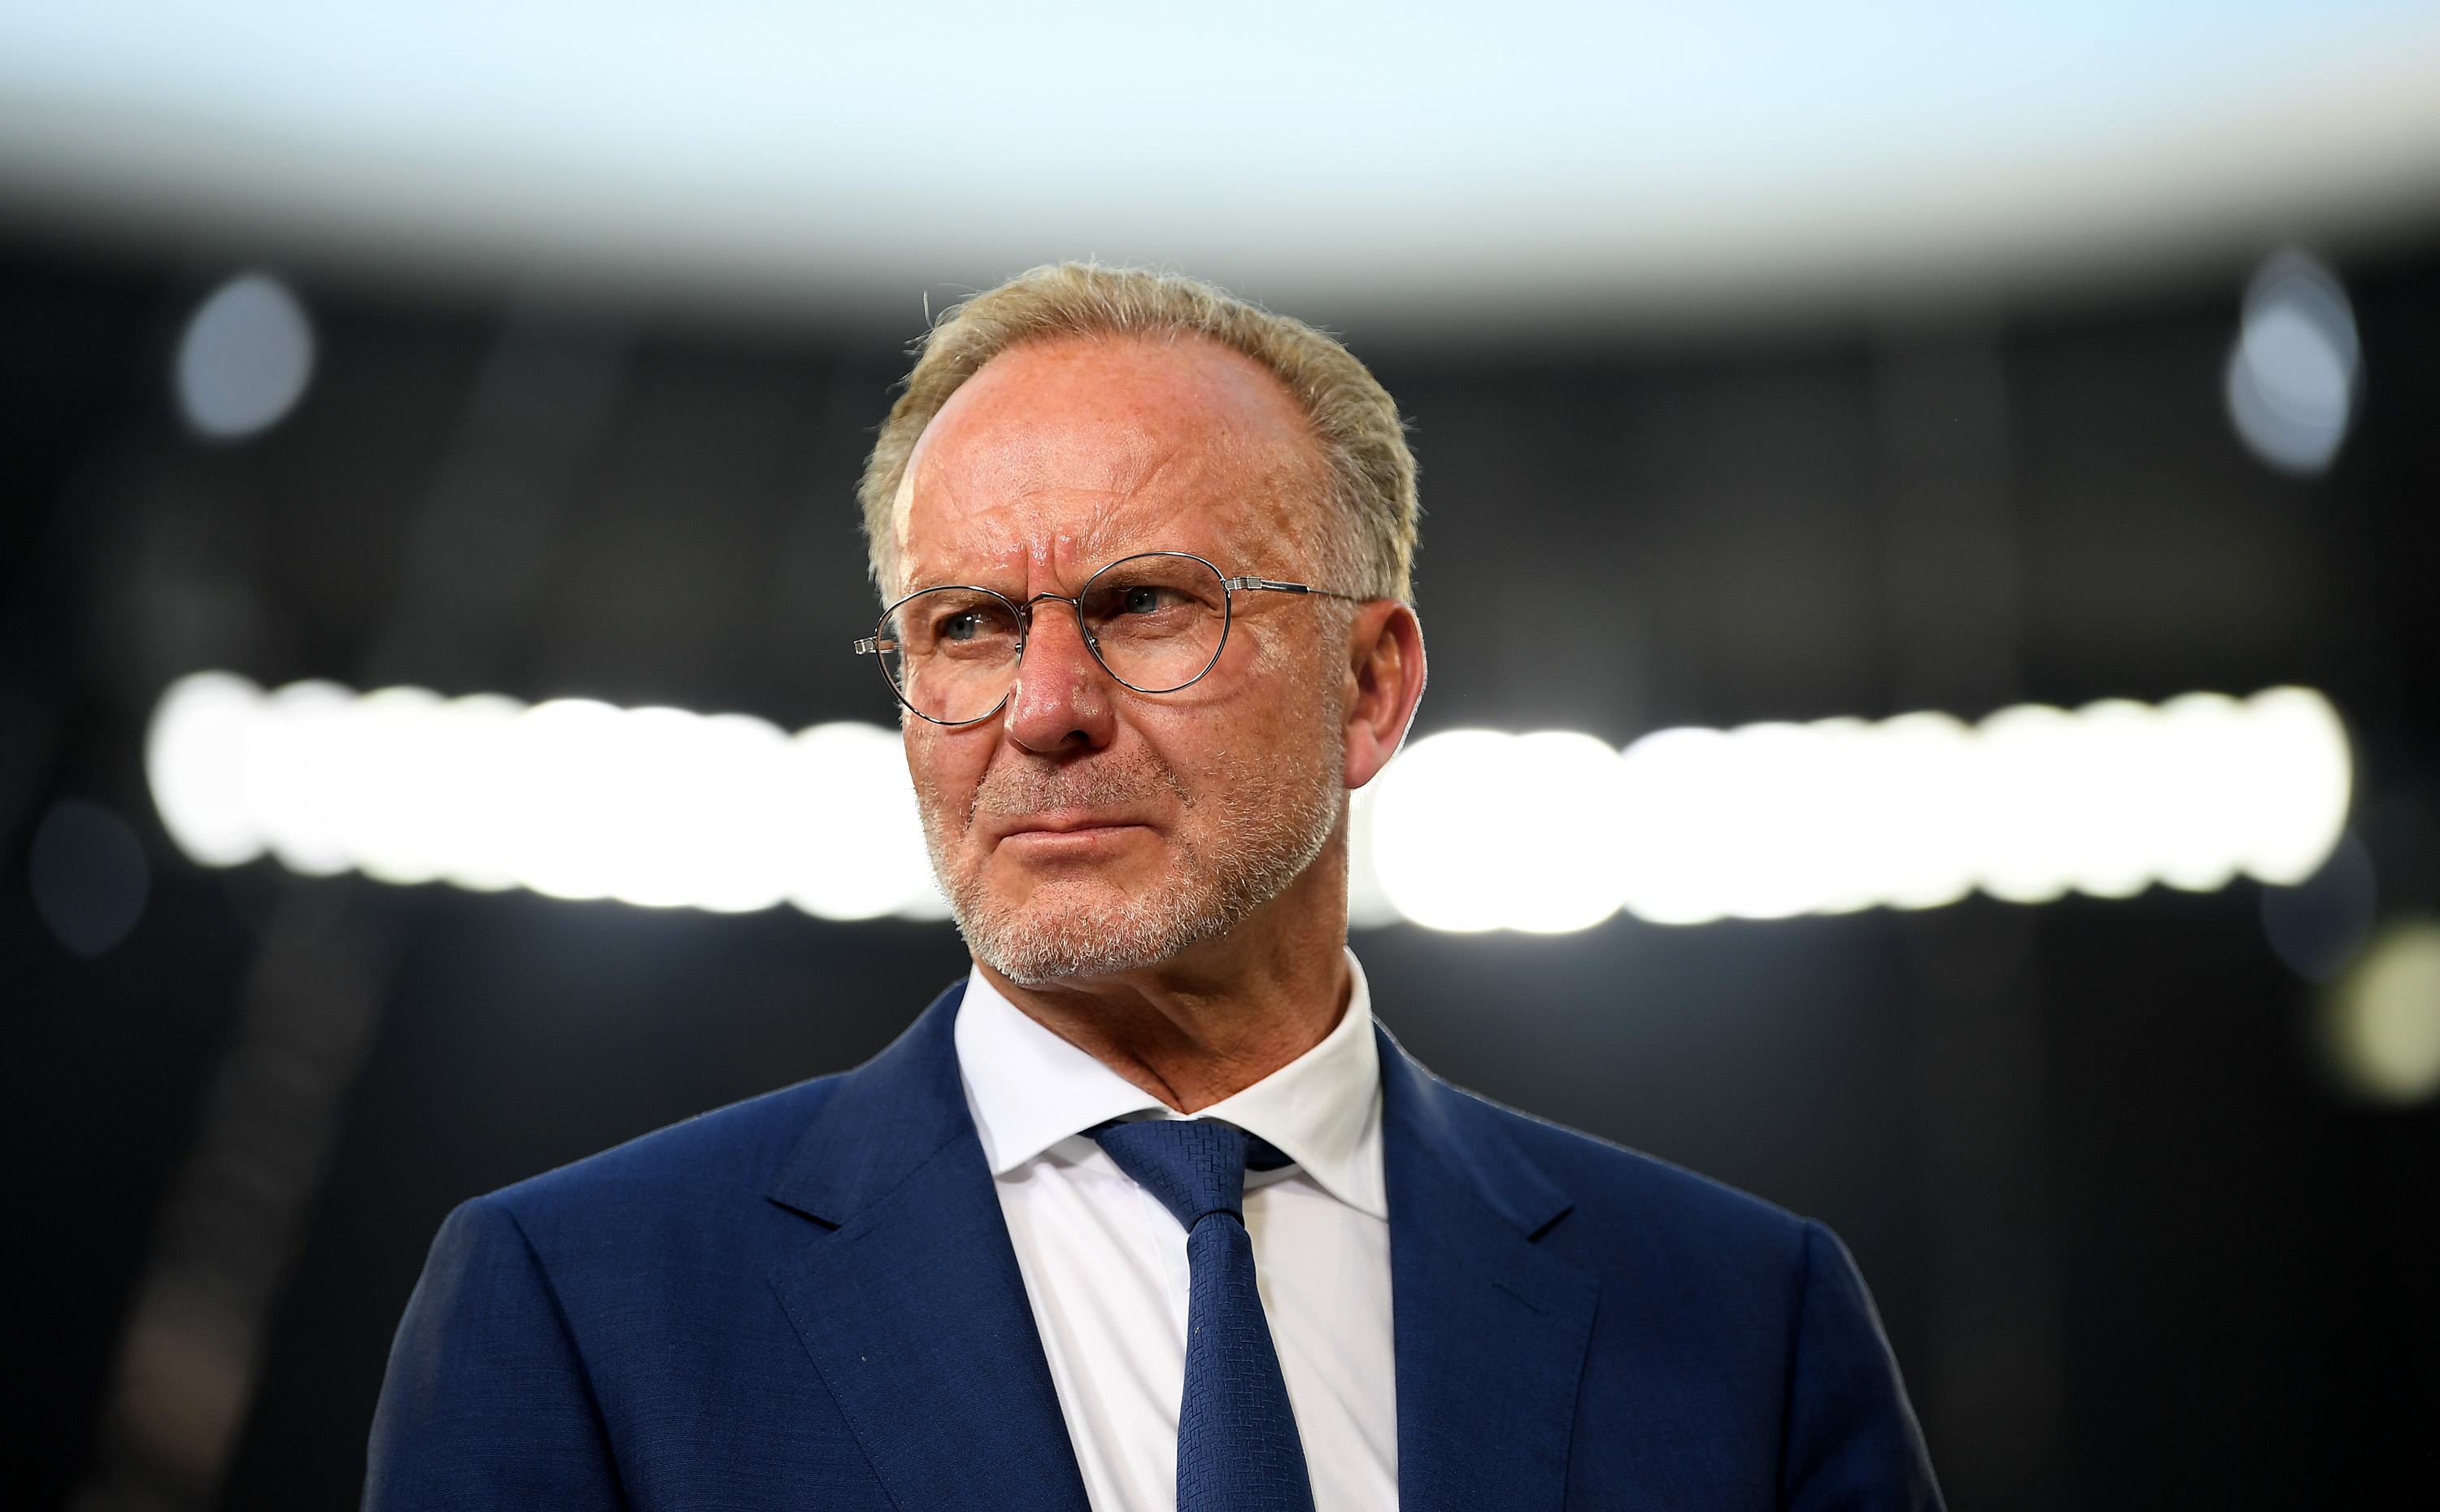 Numbers show that its difficult to keep Erling Haaland in Germany, admits Karl-Heinz Rummenigge